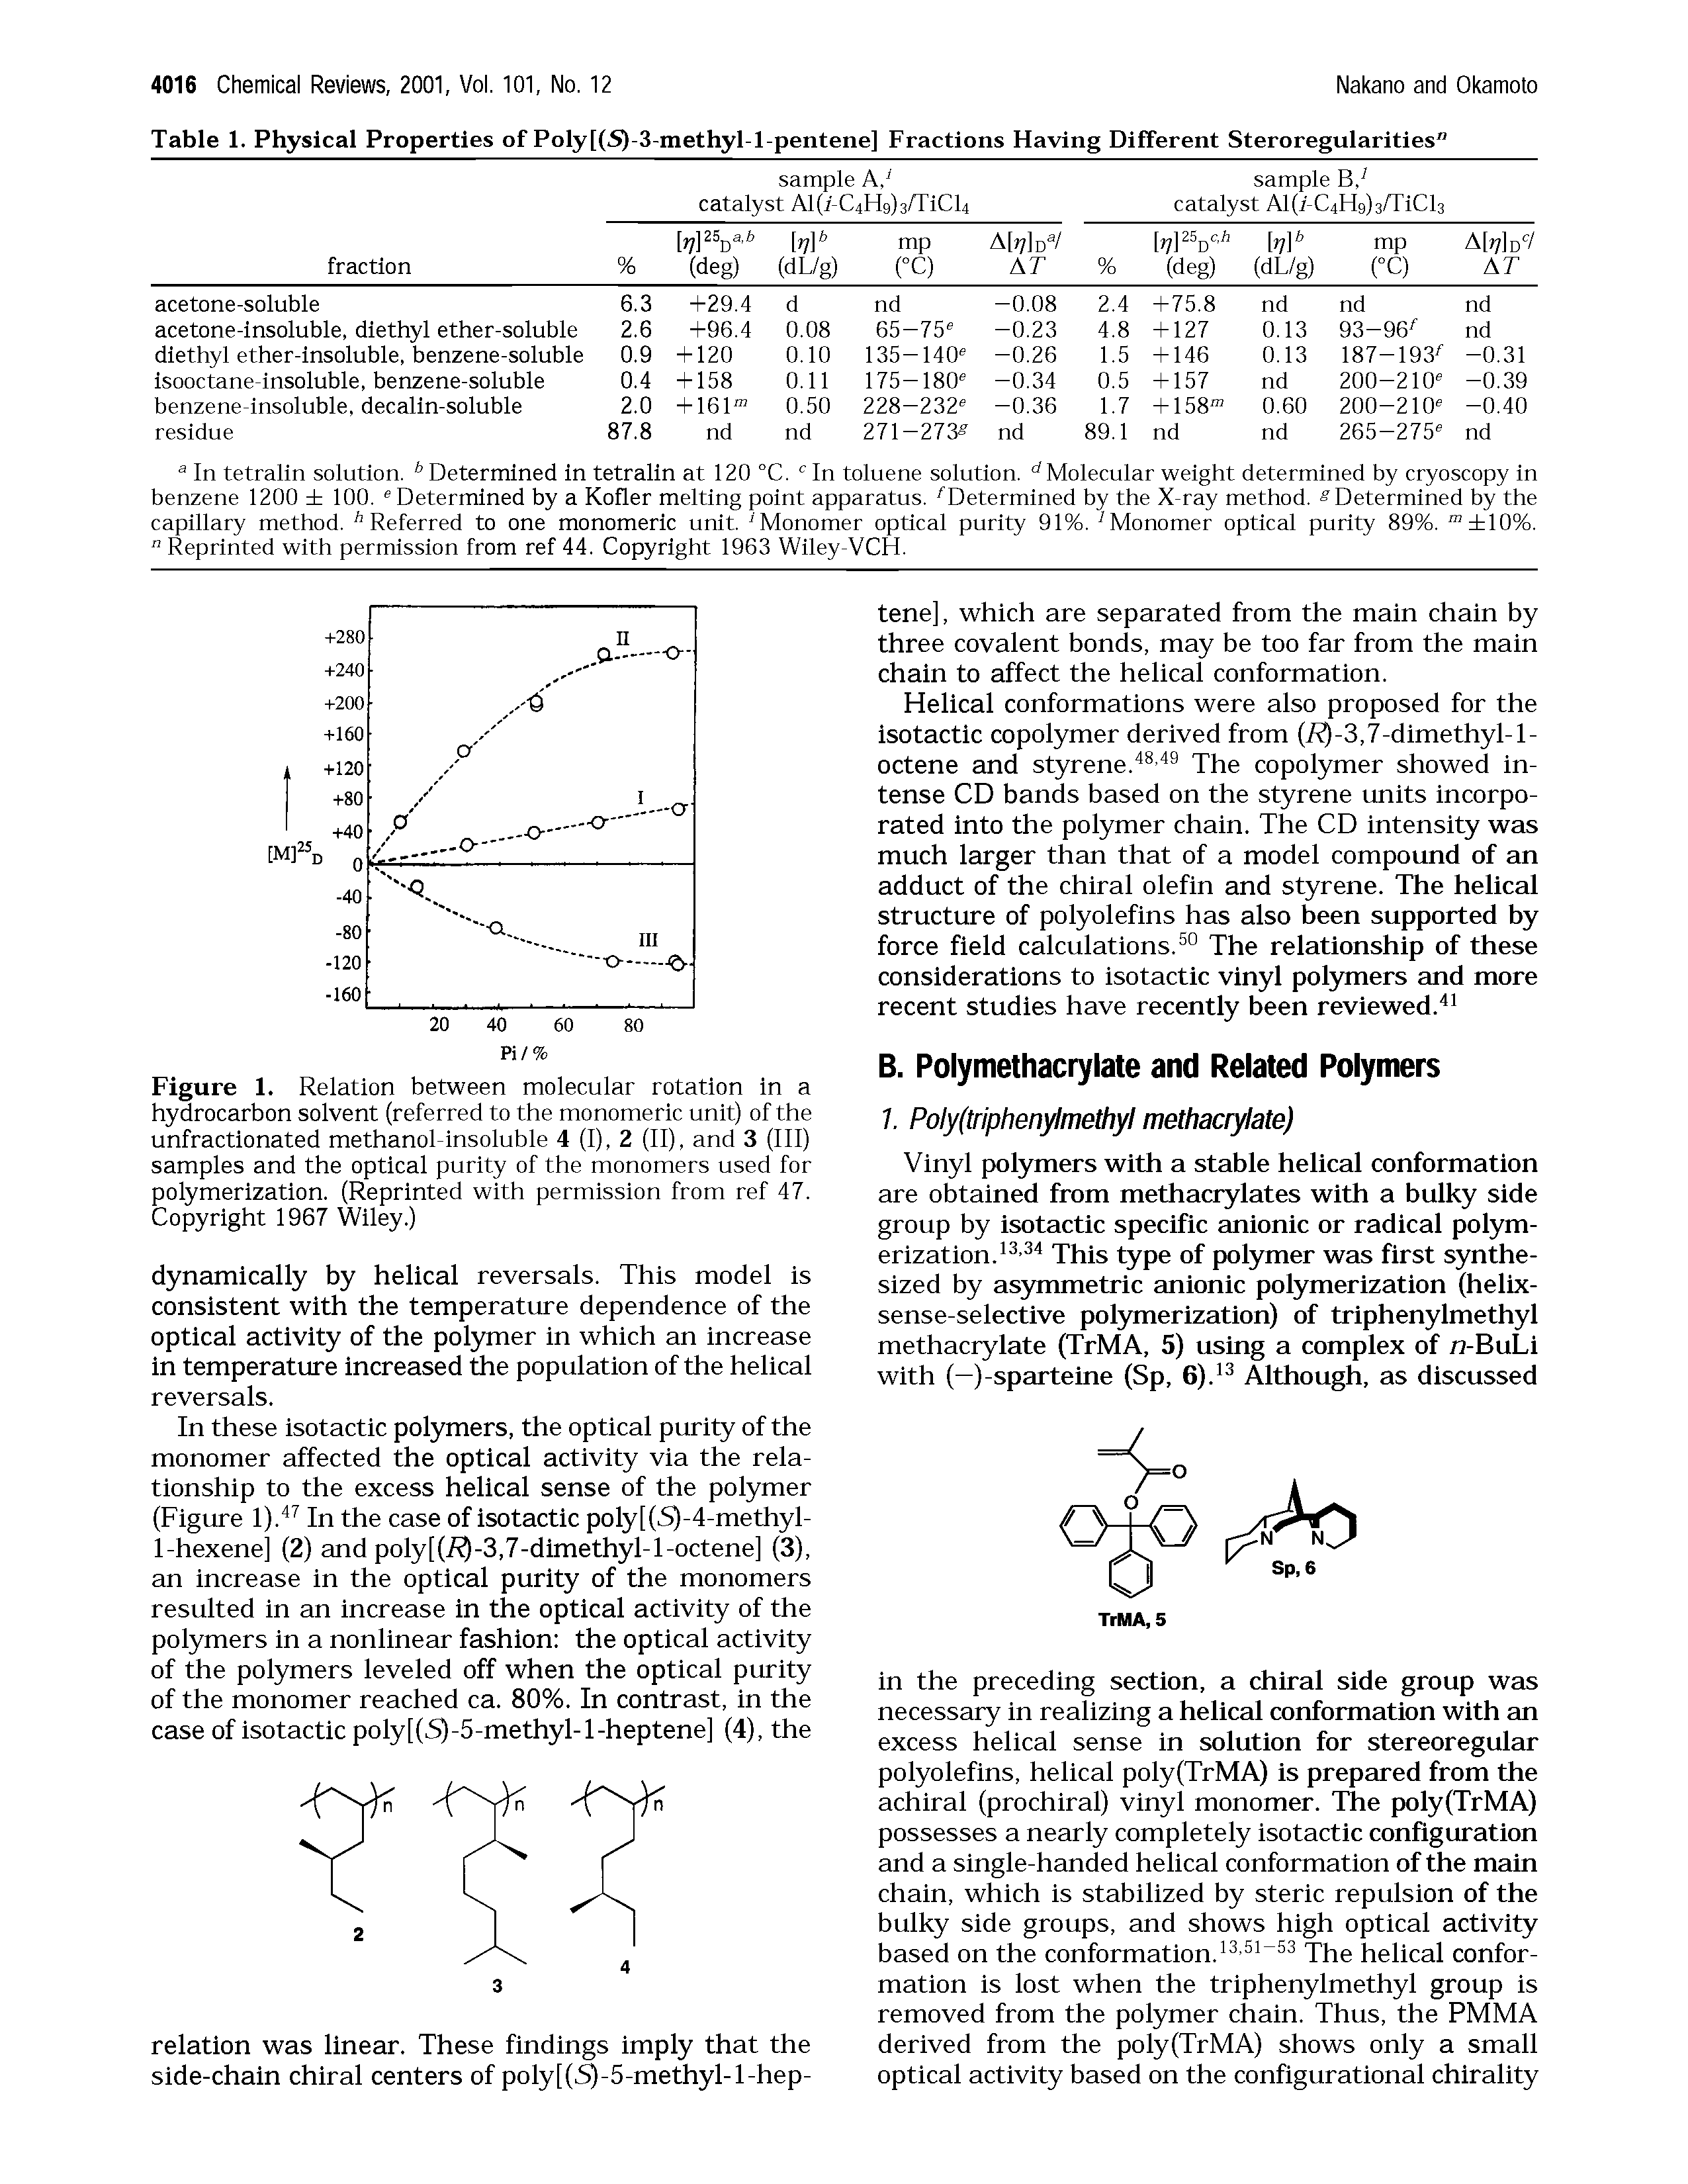 Figure 1. Relation between molecular rotation in a hydrocarbon solvent (referred to the monomeric unit) of the unfractionated methanol-insoluble 4 (I), 2 (II), and 3 (III) samples and the optical purity of the monomers used for polymerization. (Reprinted with permission from ref 47. Copyright 1967 Wiley.)...